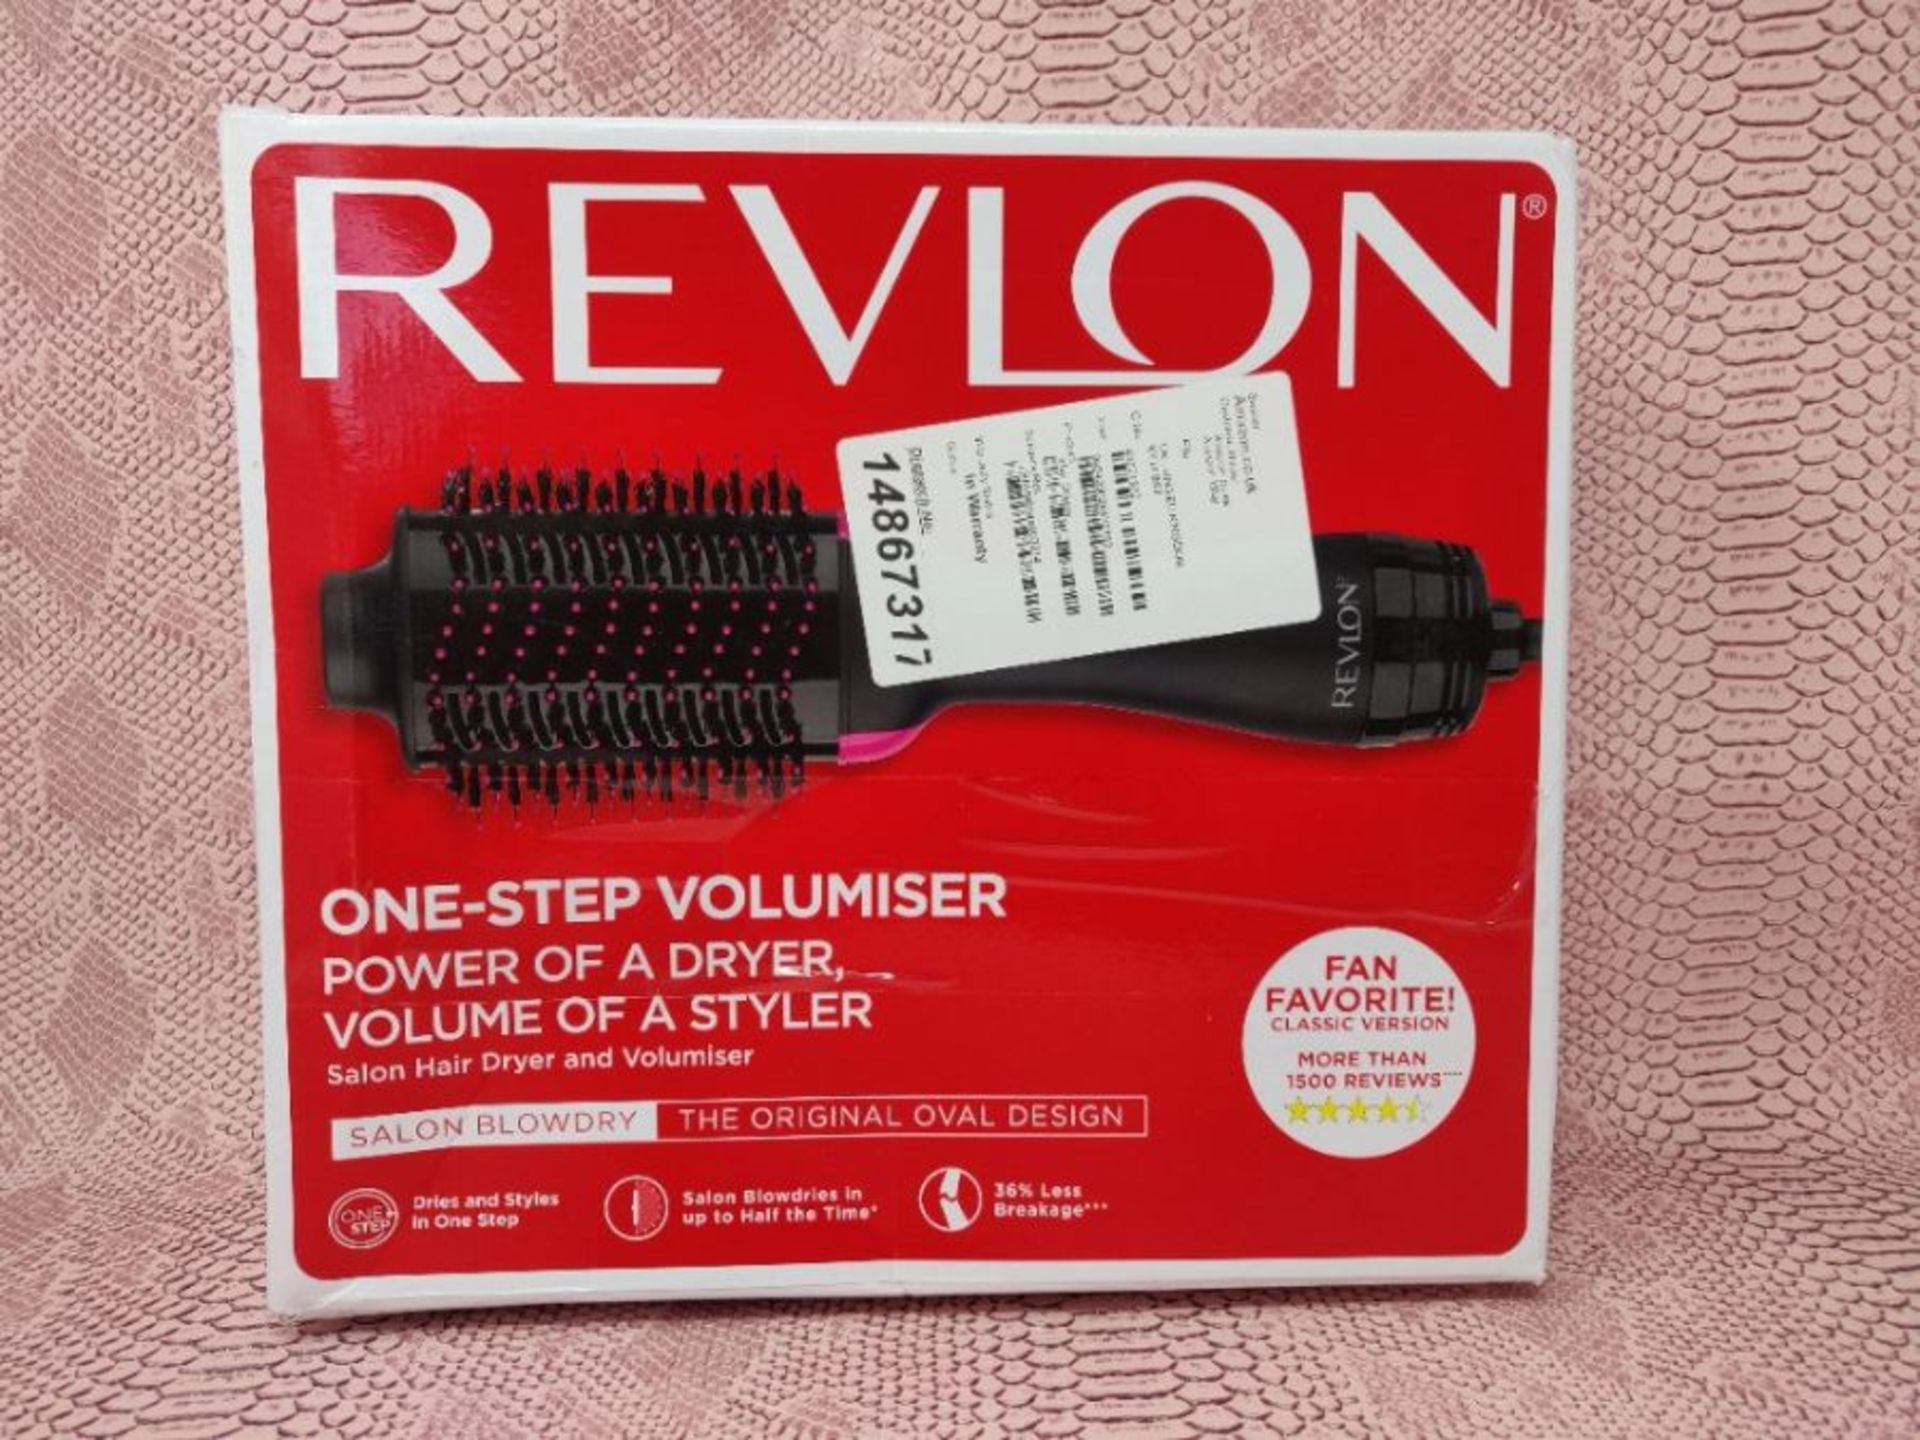 Revlon Salon One- Step Volumizer for mid to long hair (2-in-1 styling tool, dryer and - Image 2 of 3